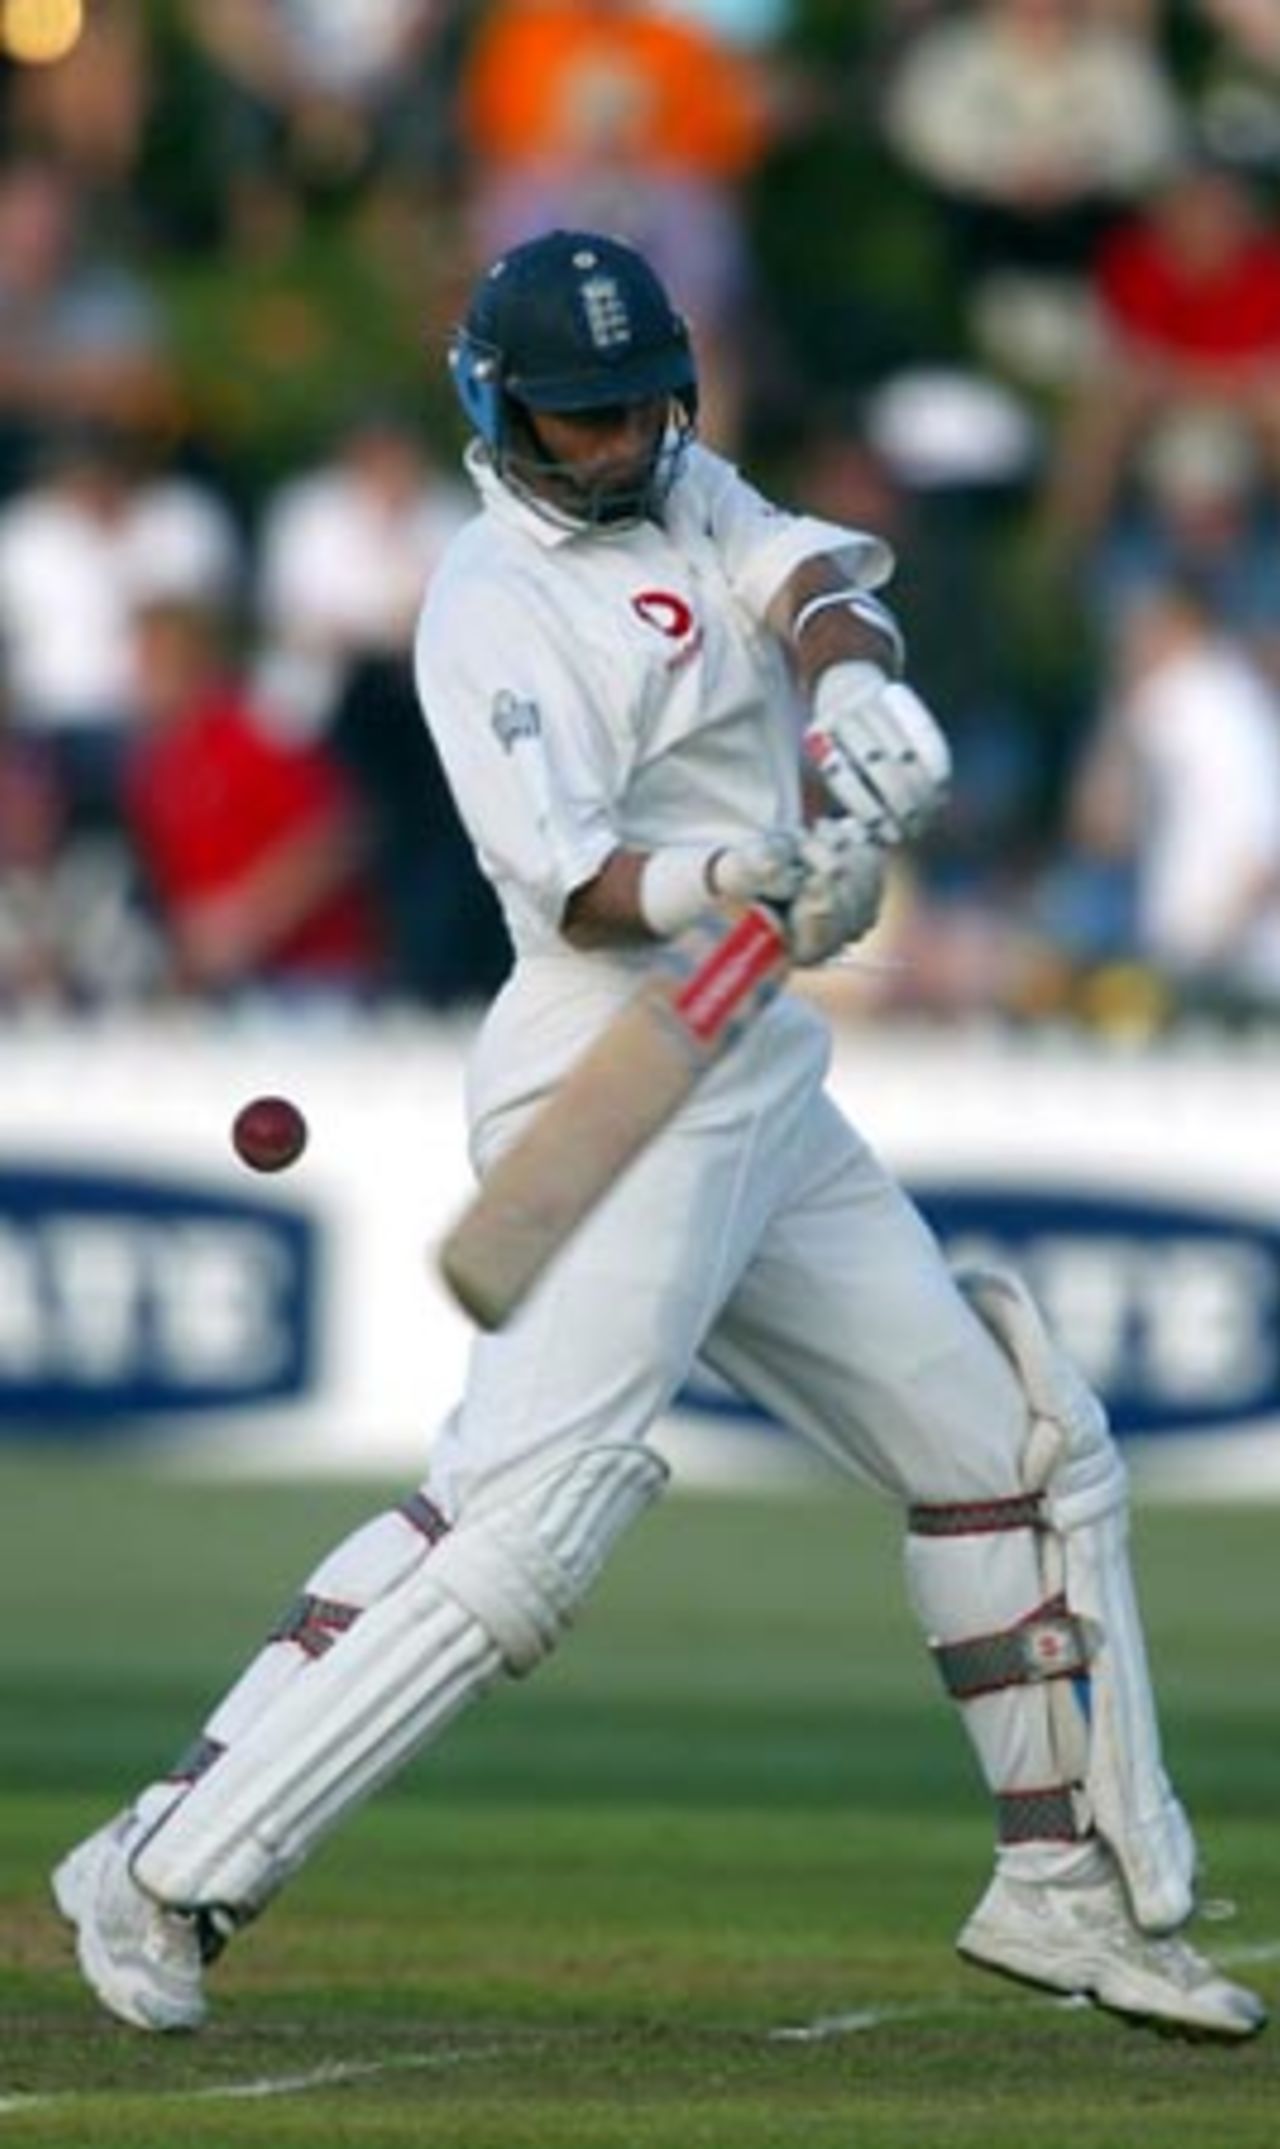 England batsman Nasser Hussain plays and misses at a delivery outside off stump. Hussain ended the second day's play on 16 not out. 2nd Test: New Zealand v England at Basin Reserve, Wellington, 21-25 March 2002 (22 March 2002).